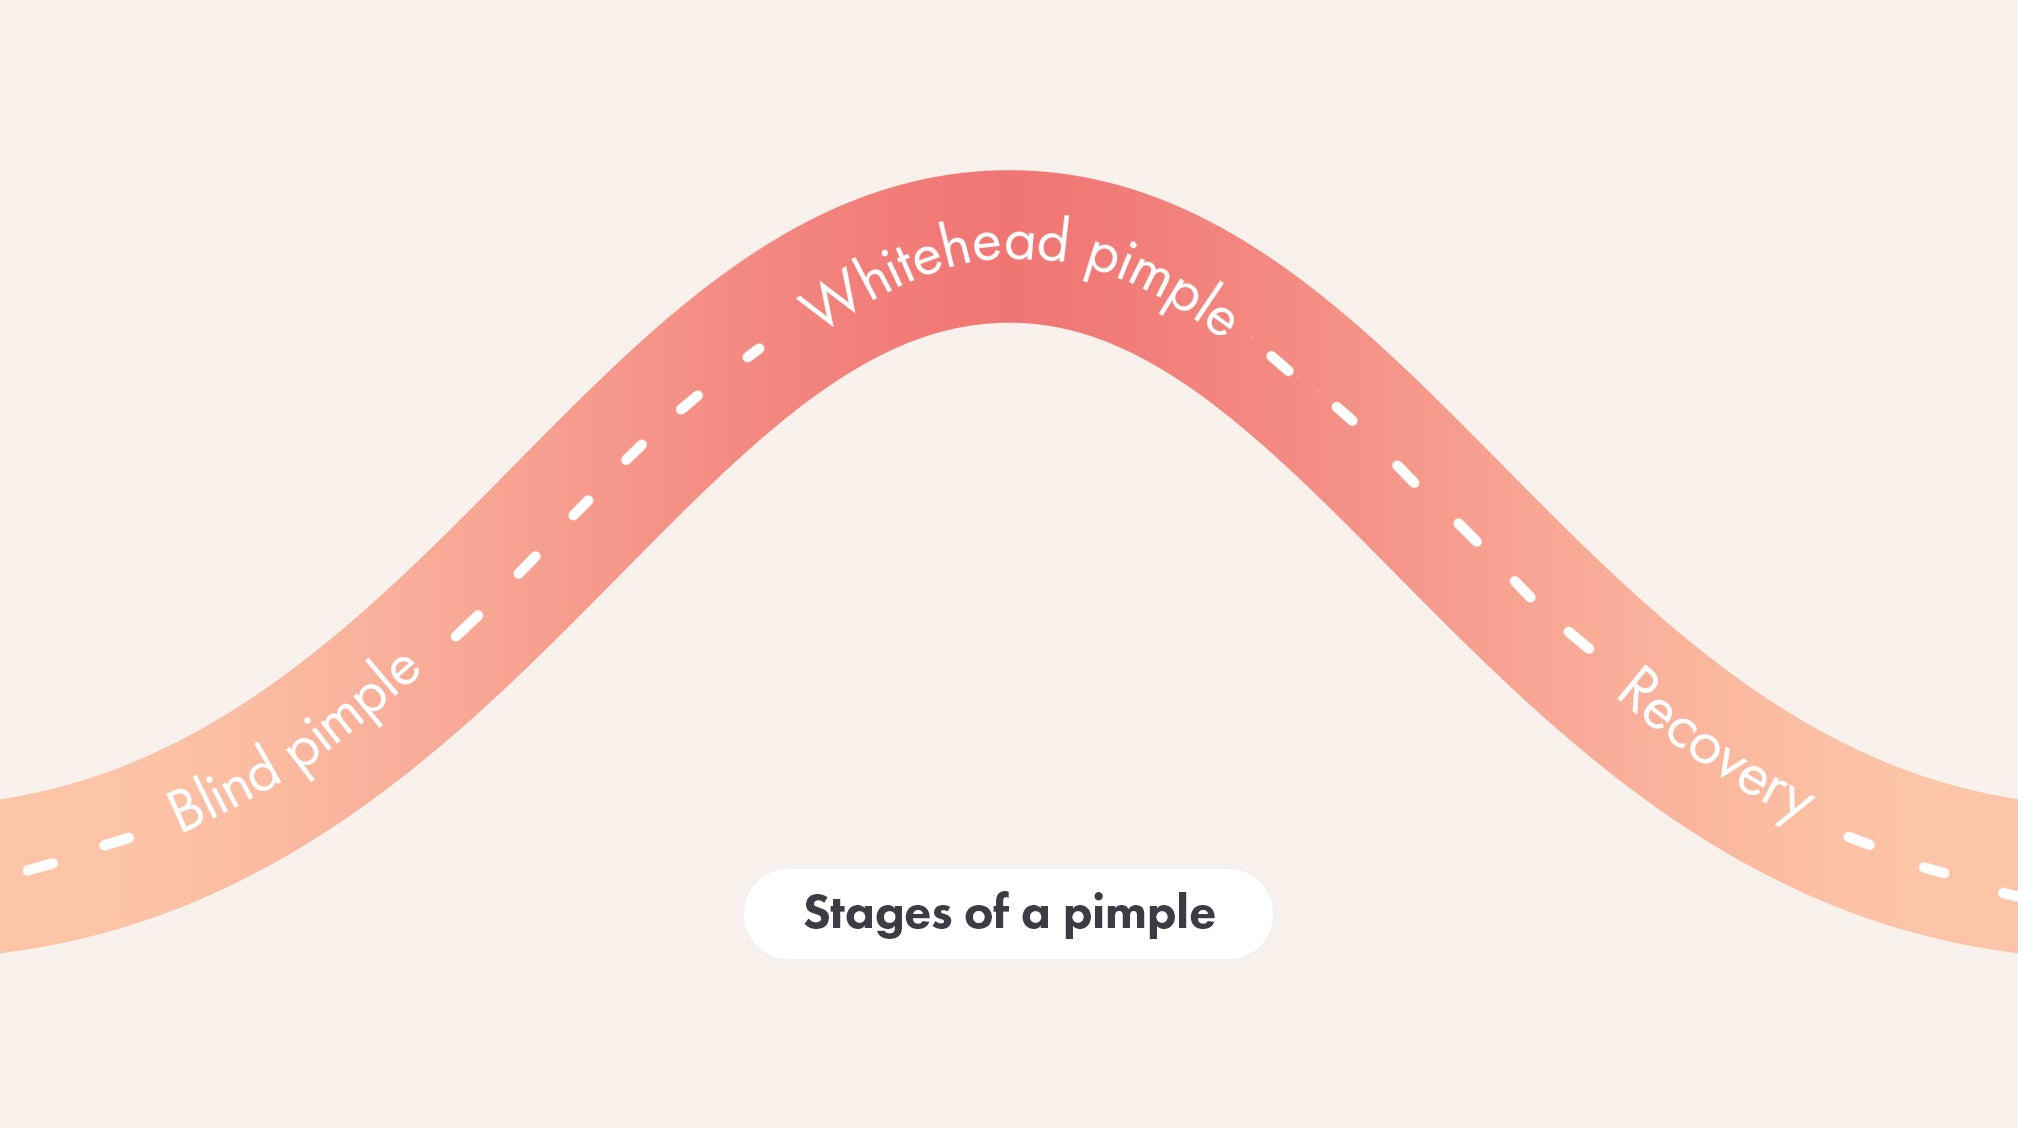 Hero Cosmetics stages of a pimple pimple journey